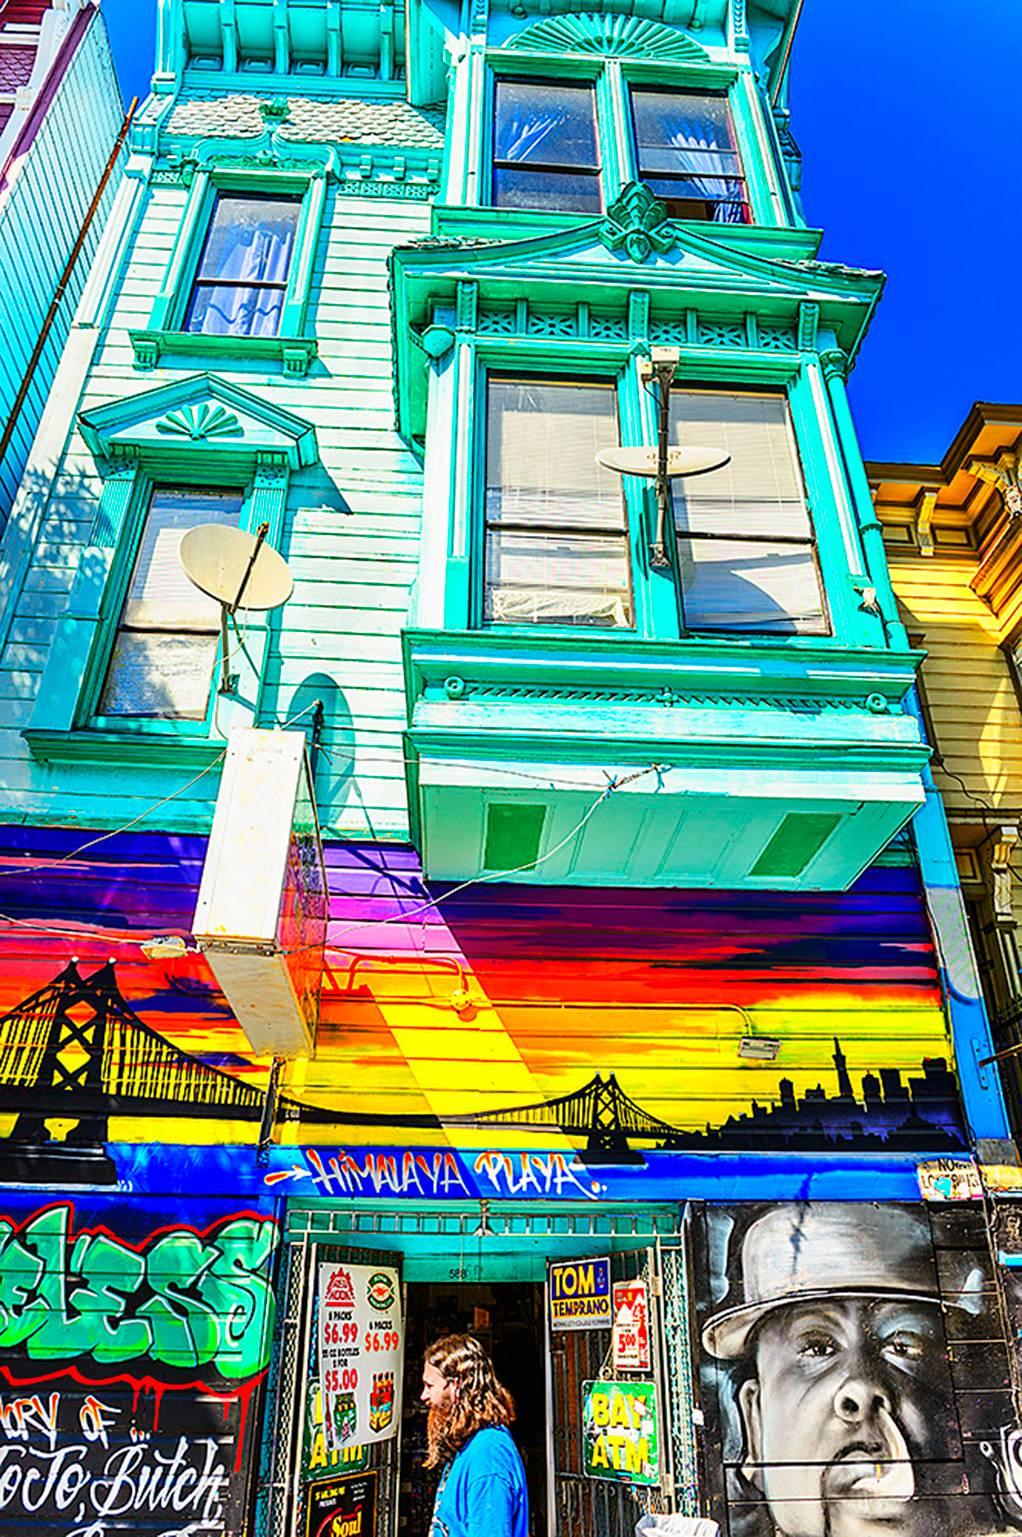 Haight-Ashbury Architecture and Groovy Man 